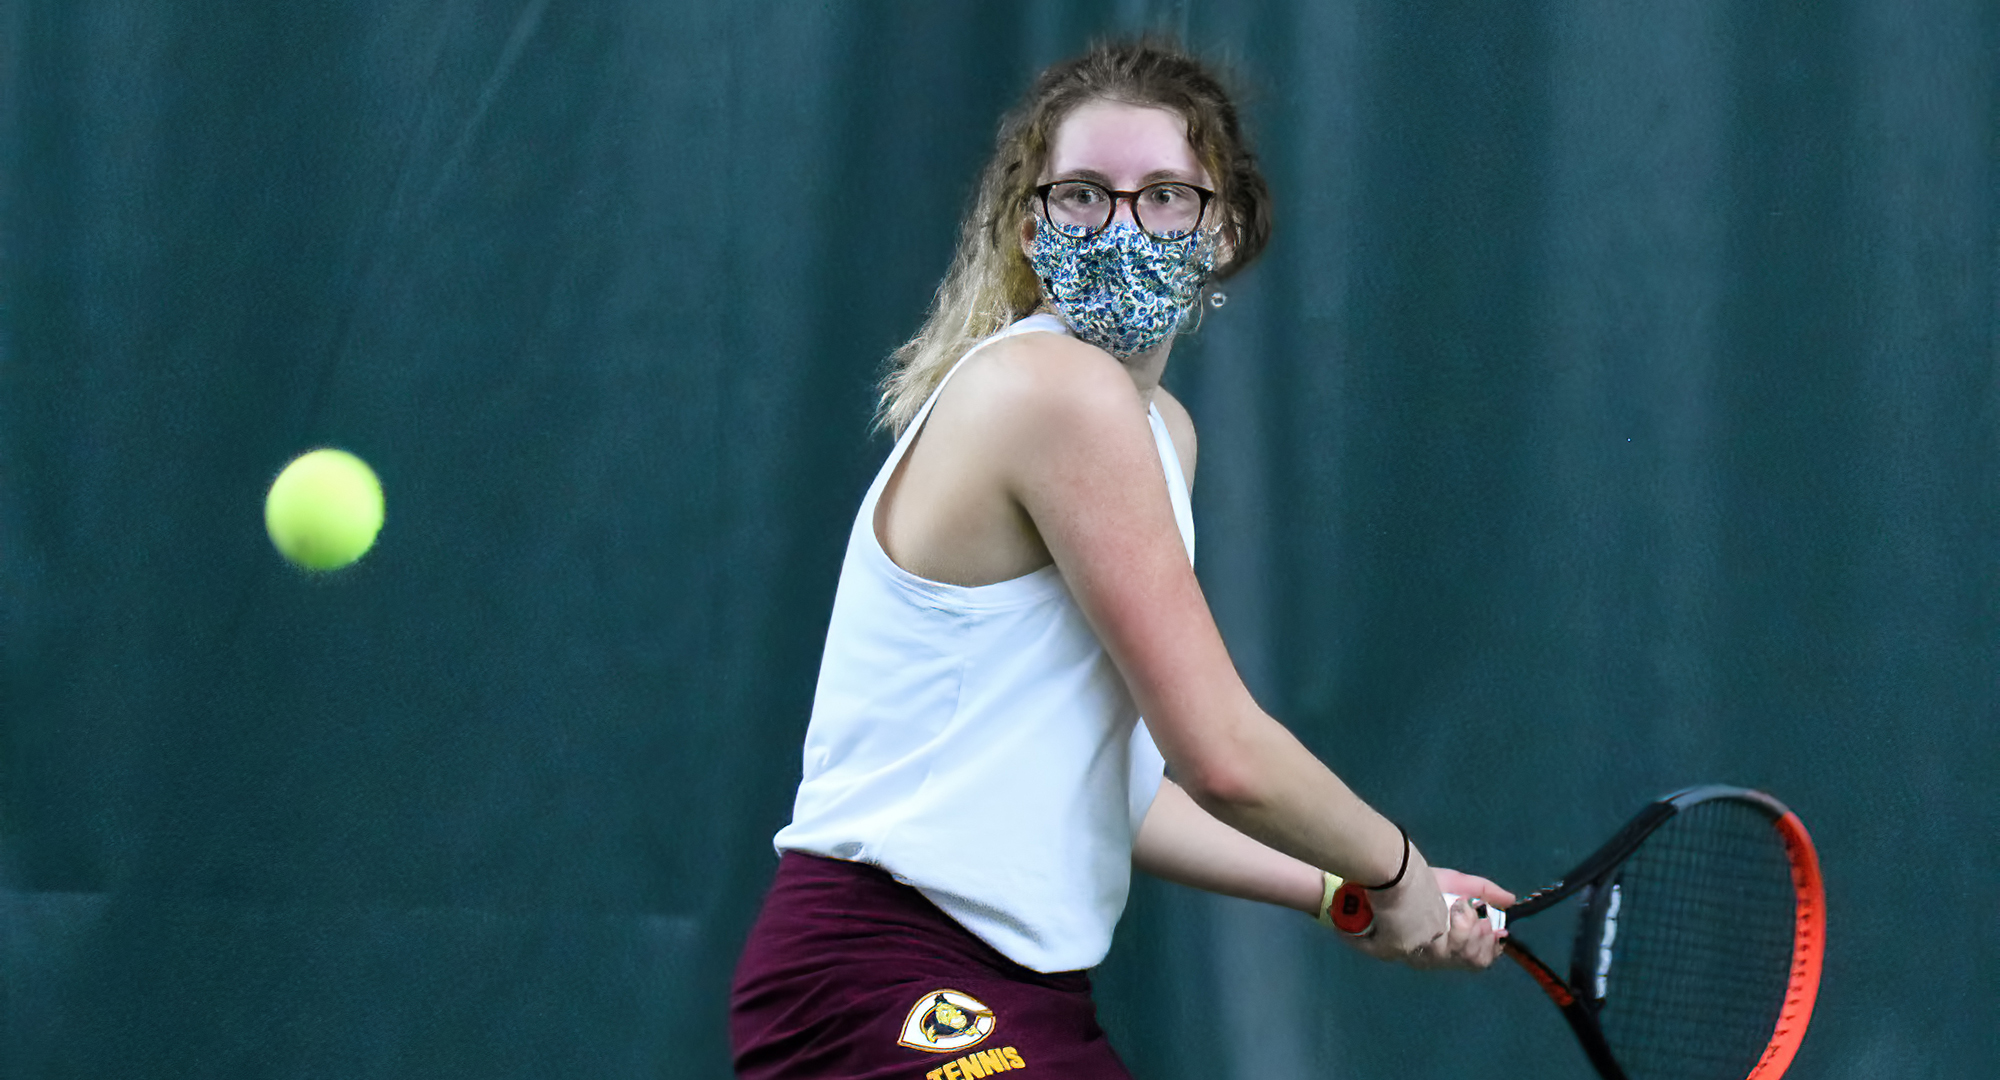 Freshman Anna Hacker played a back-nd-forth match at No.6 singles against St. Thomas as she dropped a 6-2, 6-2 decision.